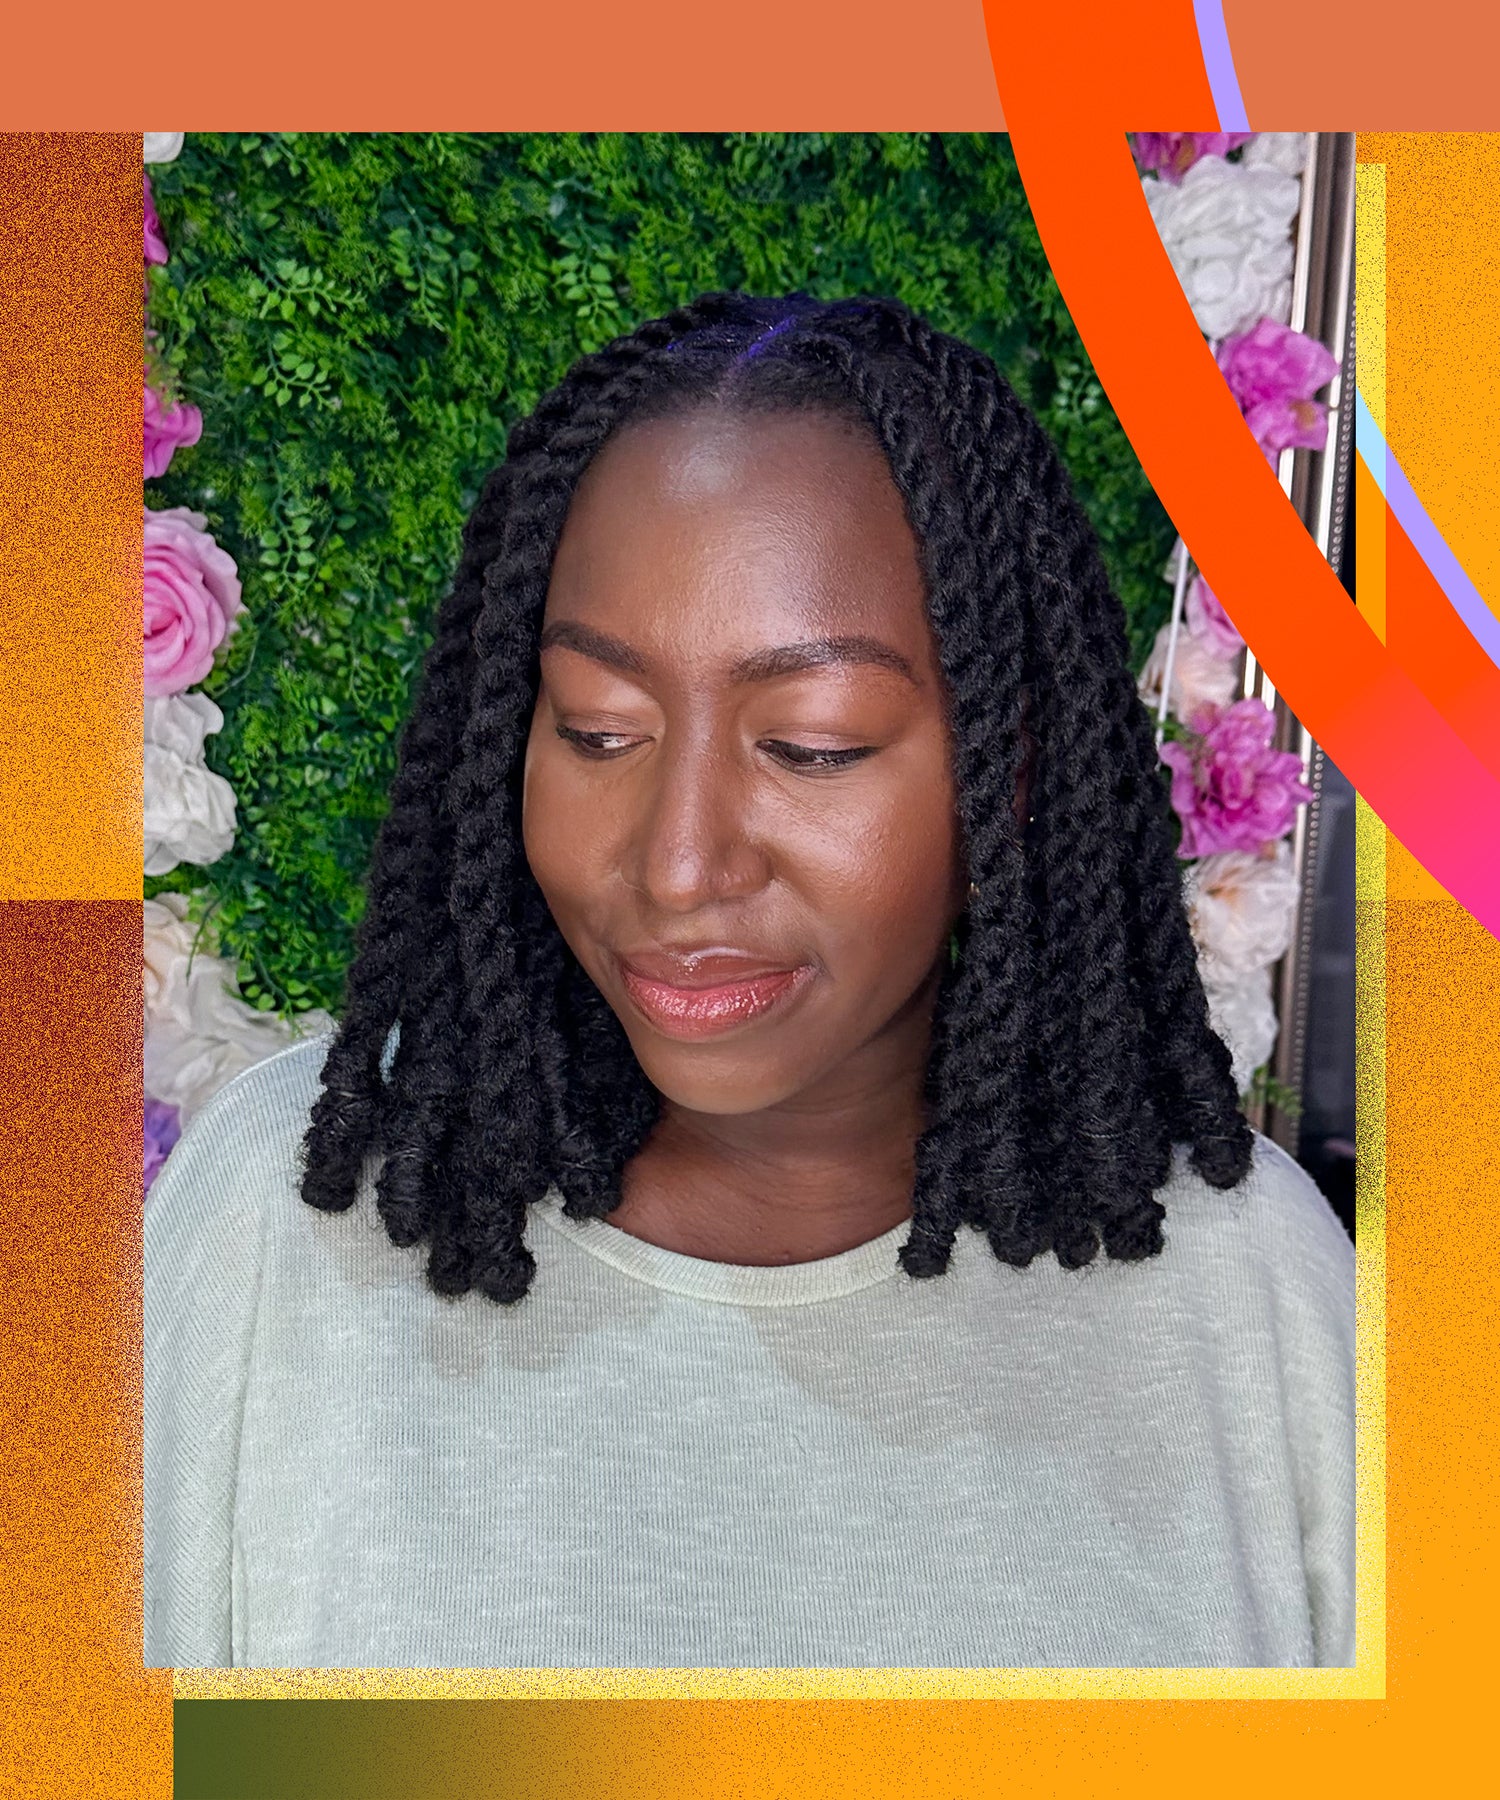 What You Should Know About Crochet Hairstyles